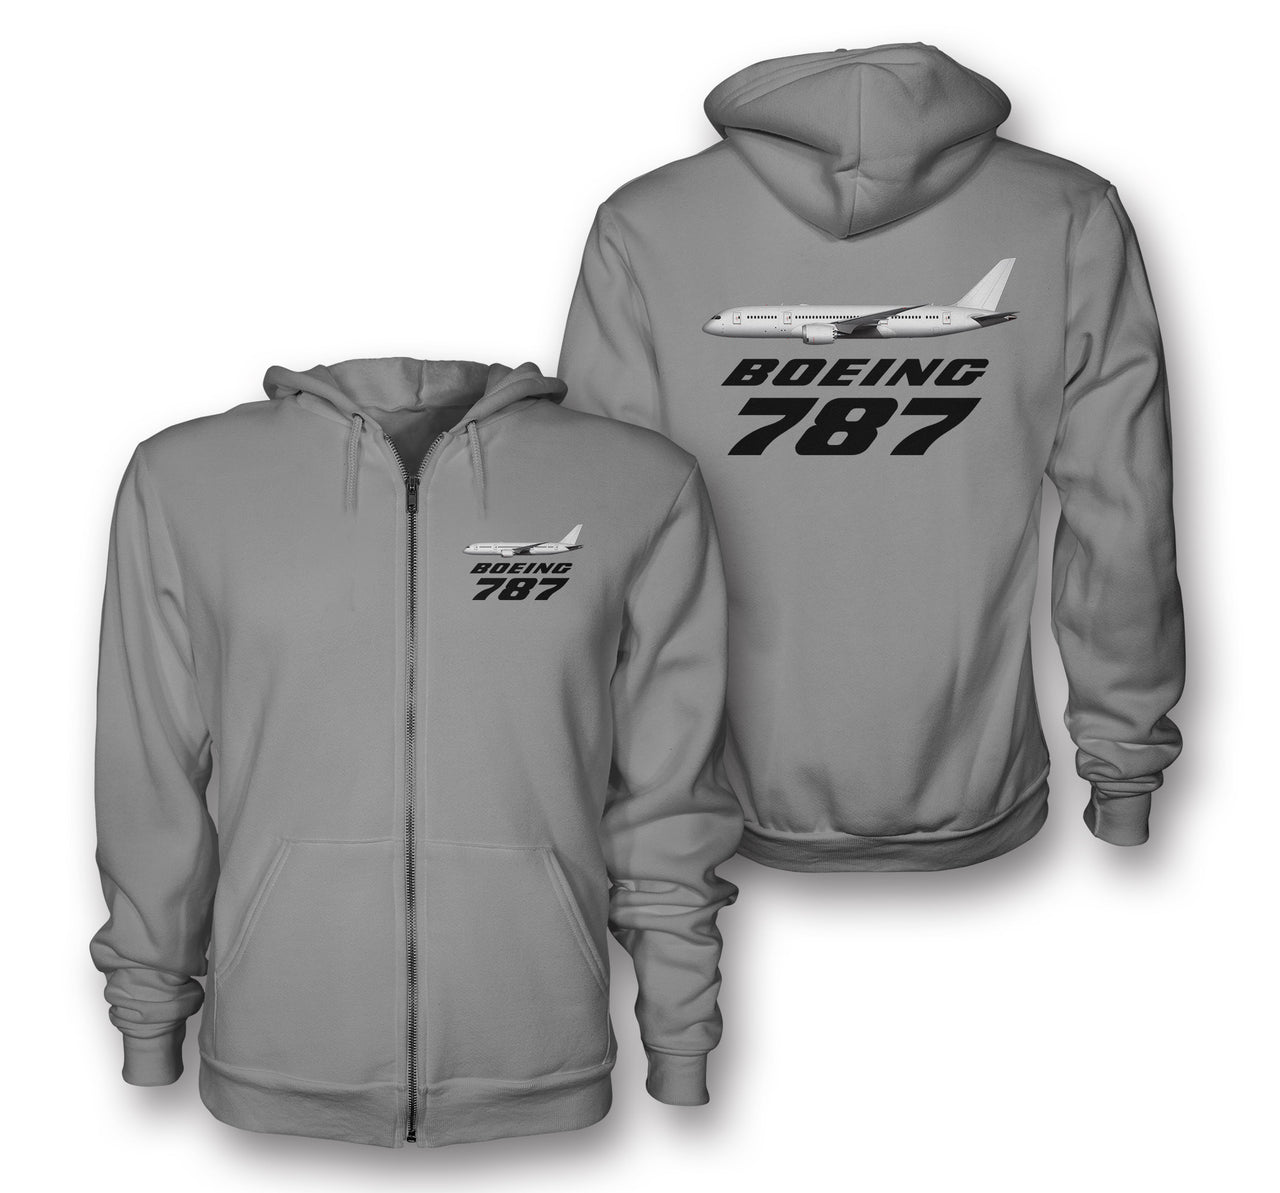 The Boeing 787 Designed Zipped Hoodies